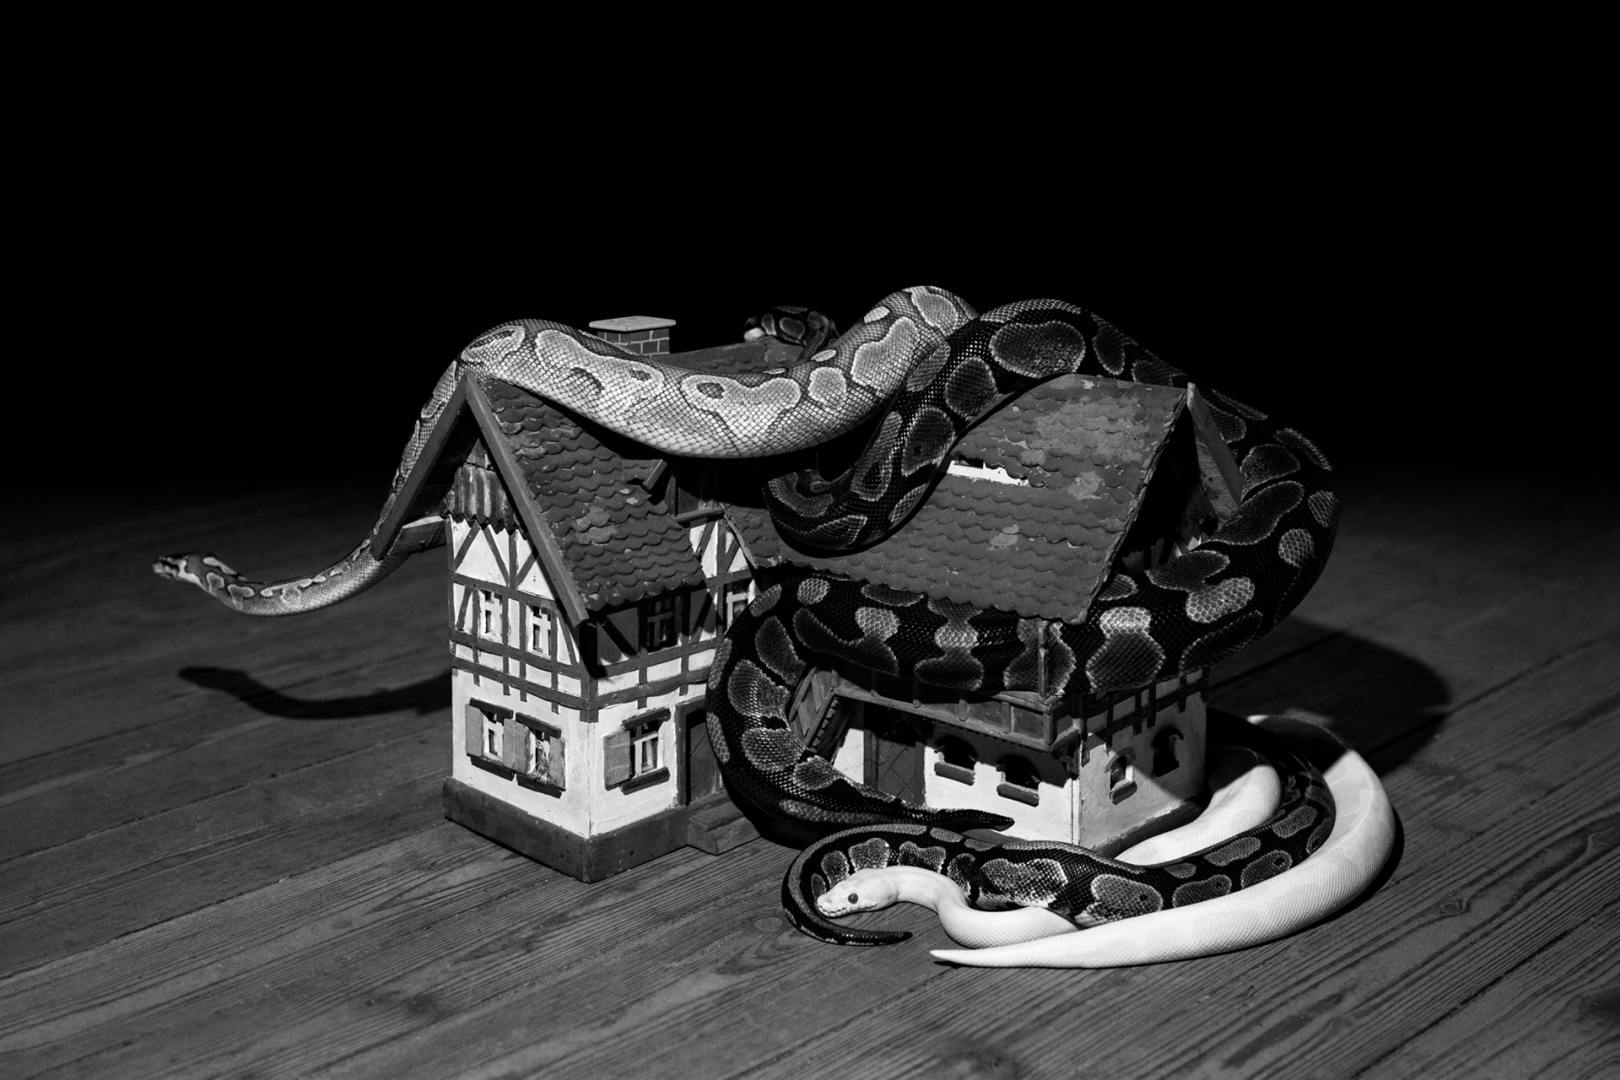 Black and white photograph from Plexus by Elena Helfrecht showing snakes coiled around a miniature replica of a building